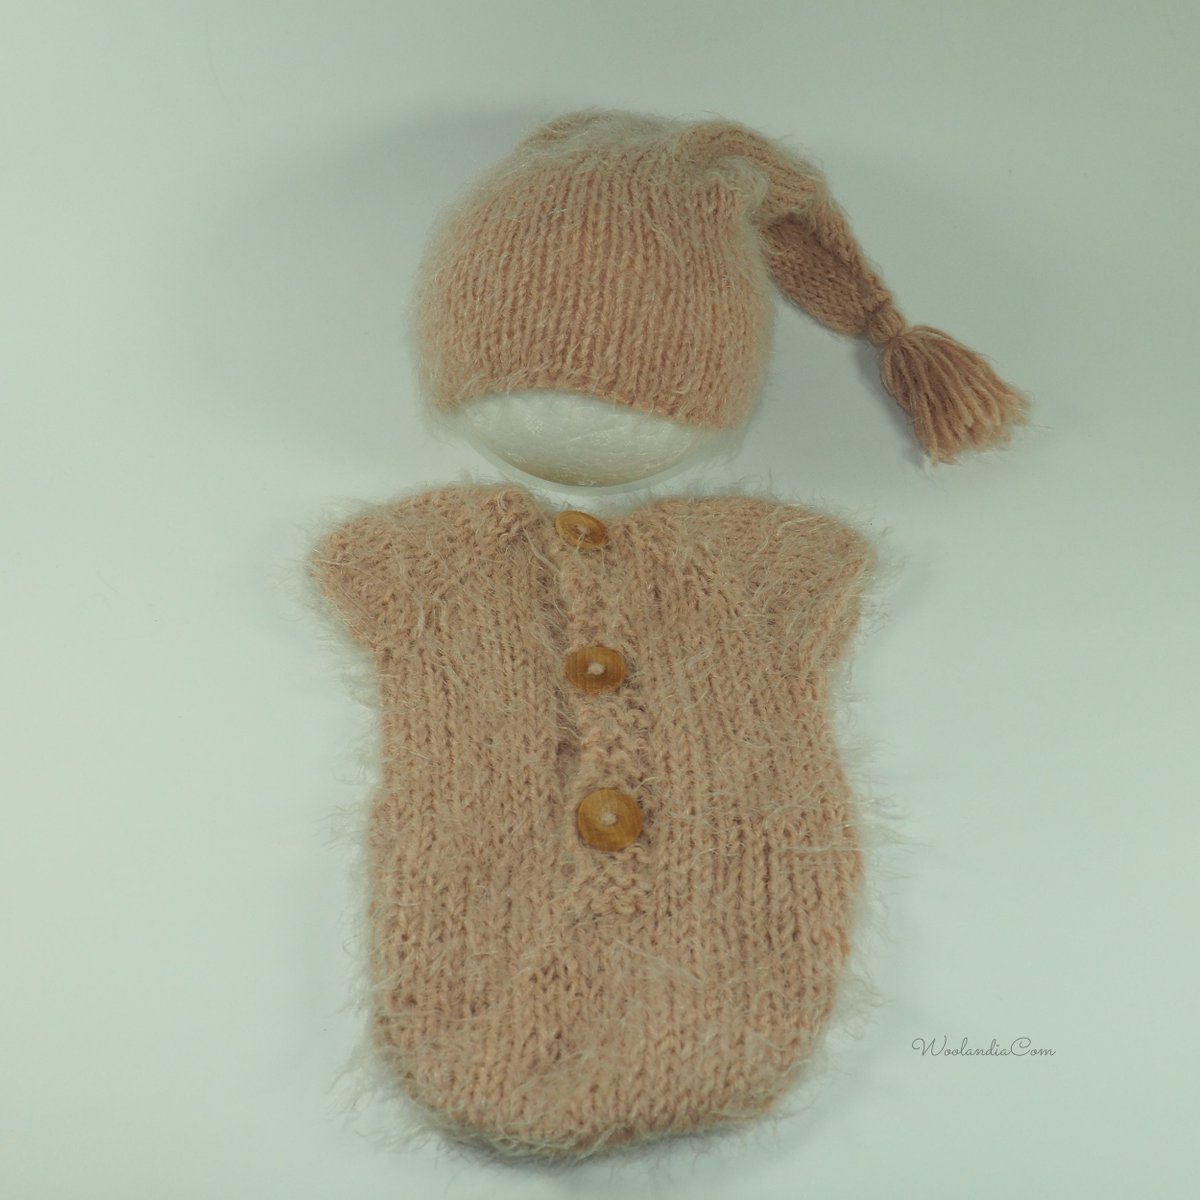 Knitted bodysuit with sleeping hat #newbornsleepyhat #elfhat #newbornhat #newbornsleepinghat #babyhat #gnomehat #gnomebonnet #infantphotography #babyphotography #newbornbonnet #babygnome #babyelf #longtailhat #babyhalloweenhat #sleepinghat #newbornbodysuit